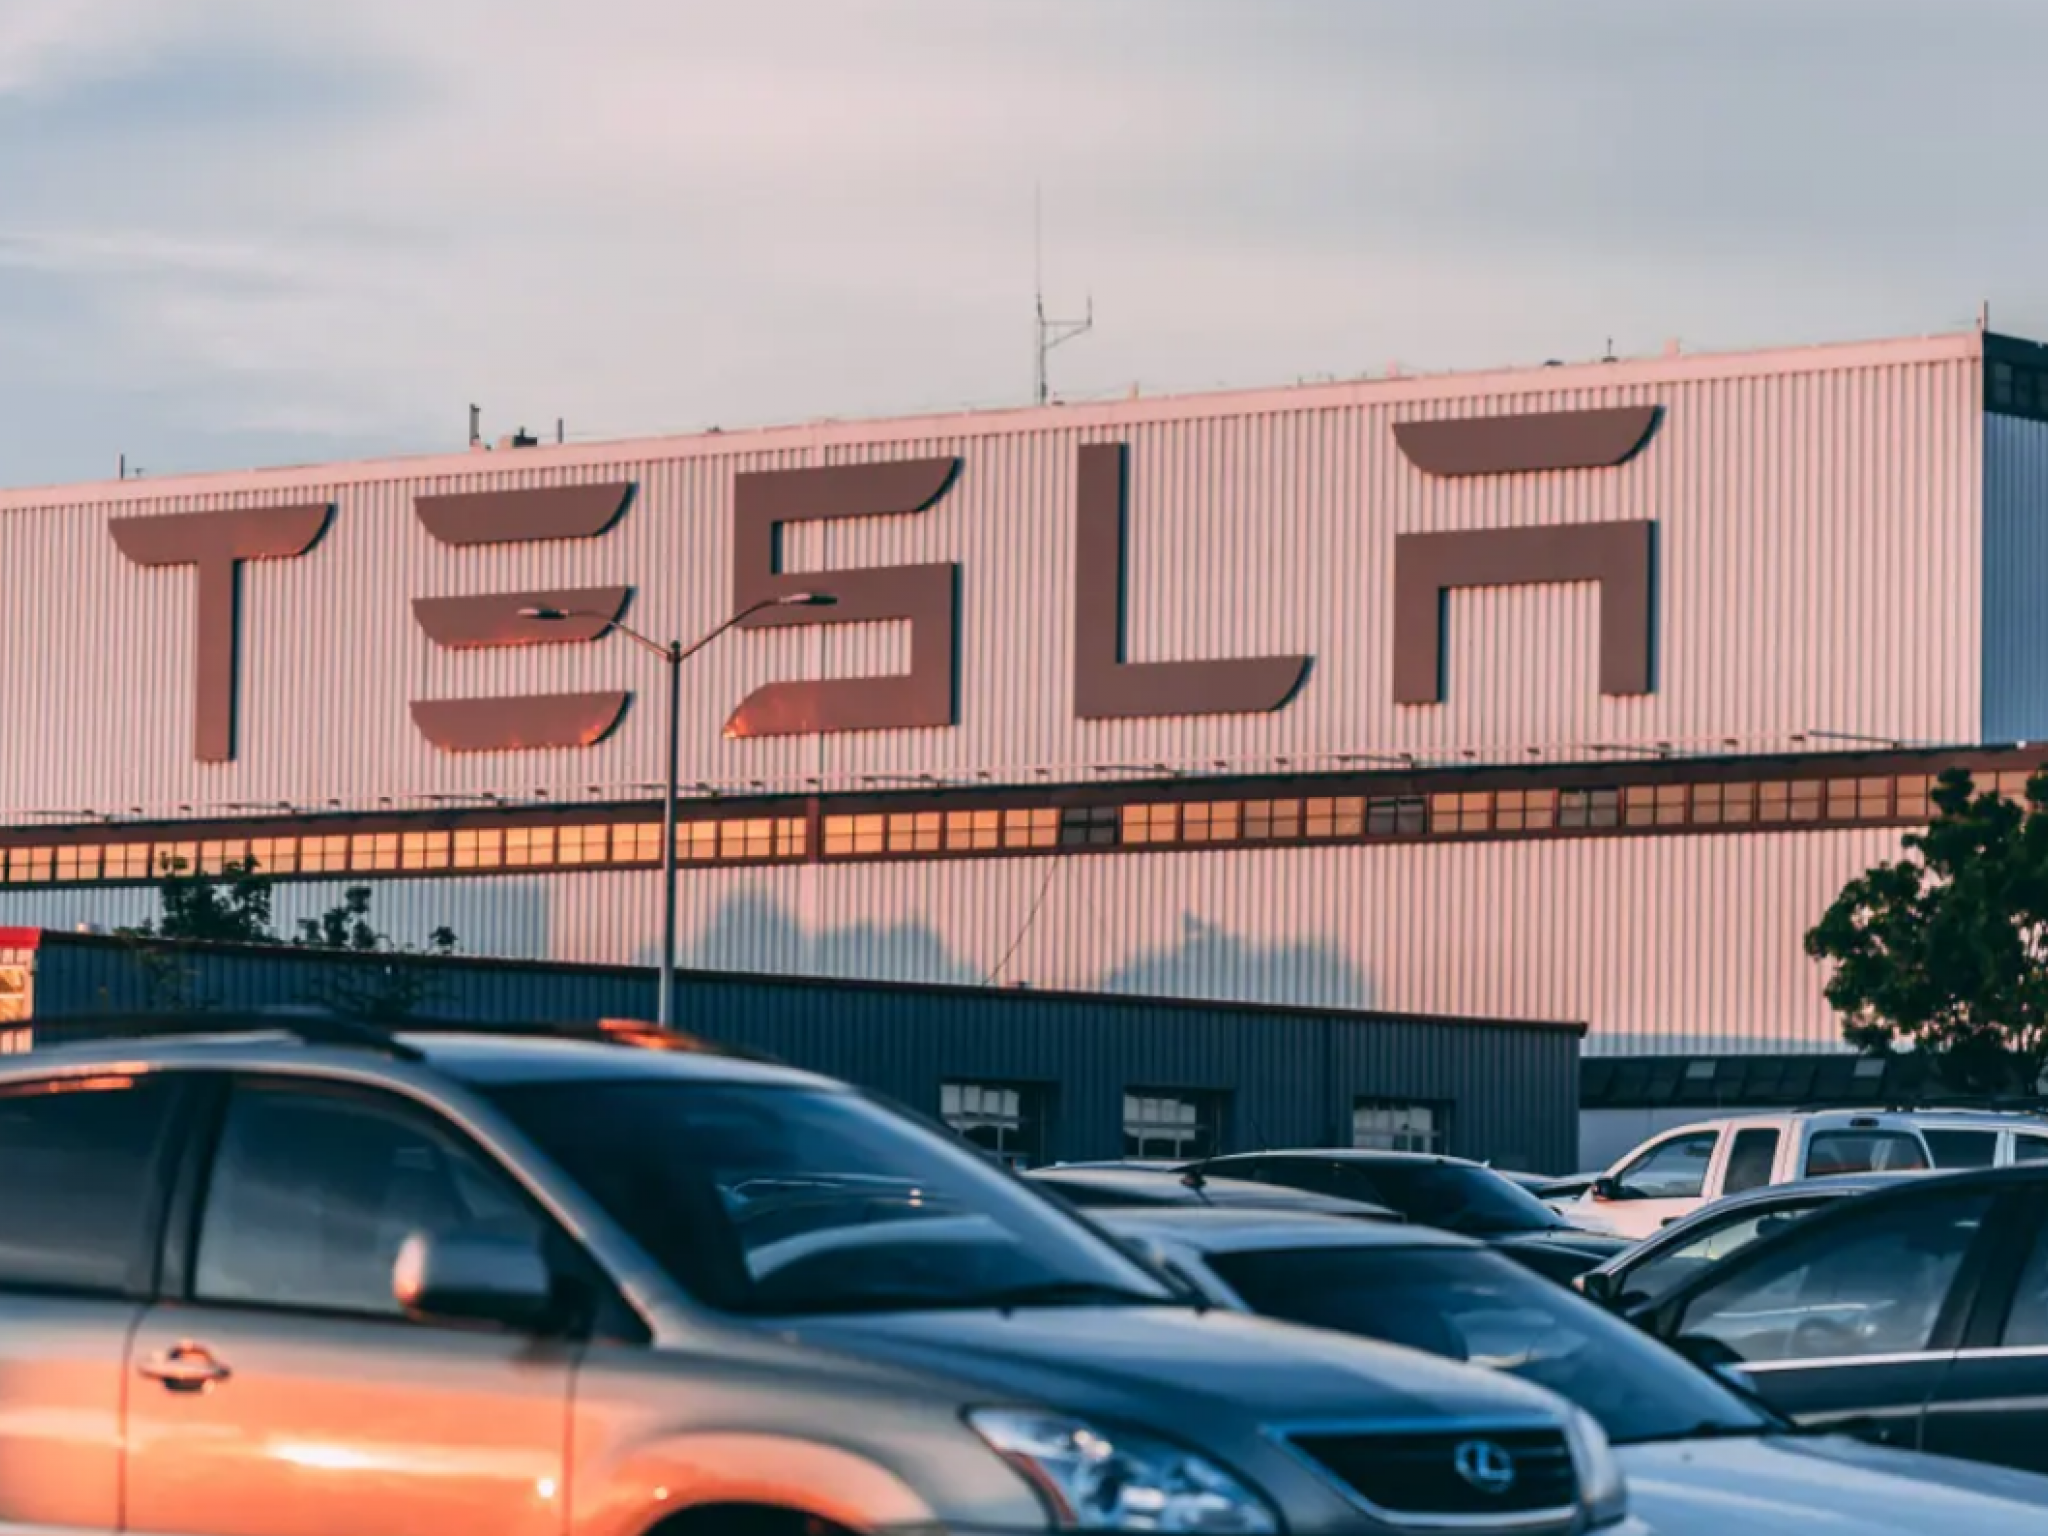  heres-when-the-tesla-shareholder-meeting-is-happening-and-how-you-can-get-invited 